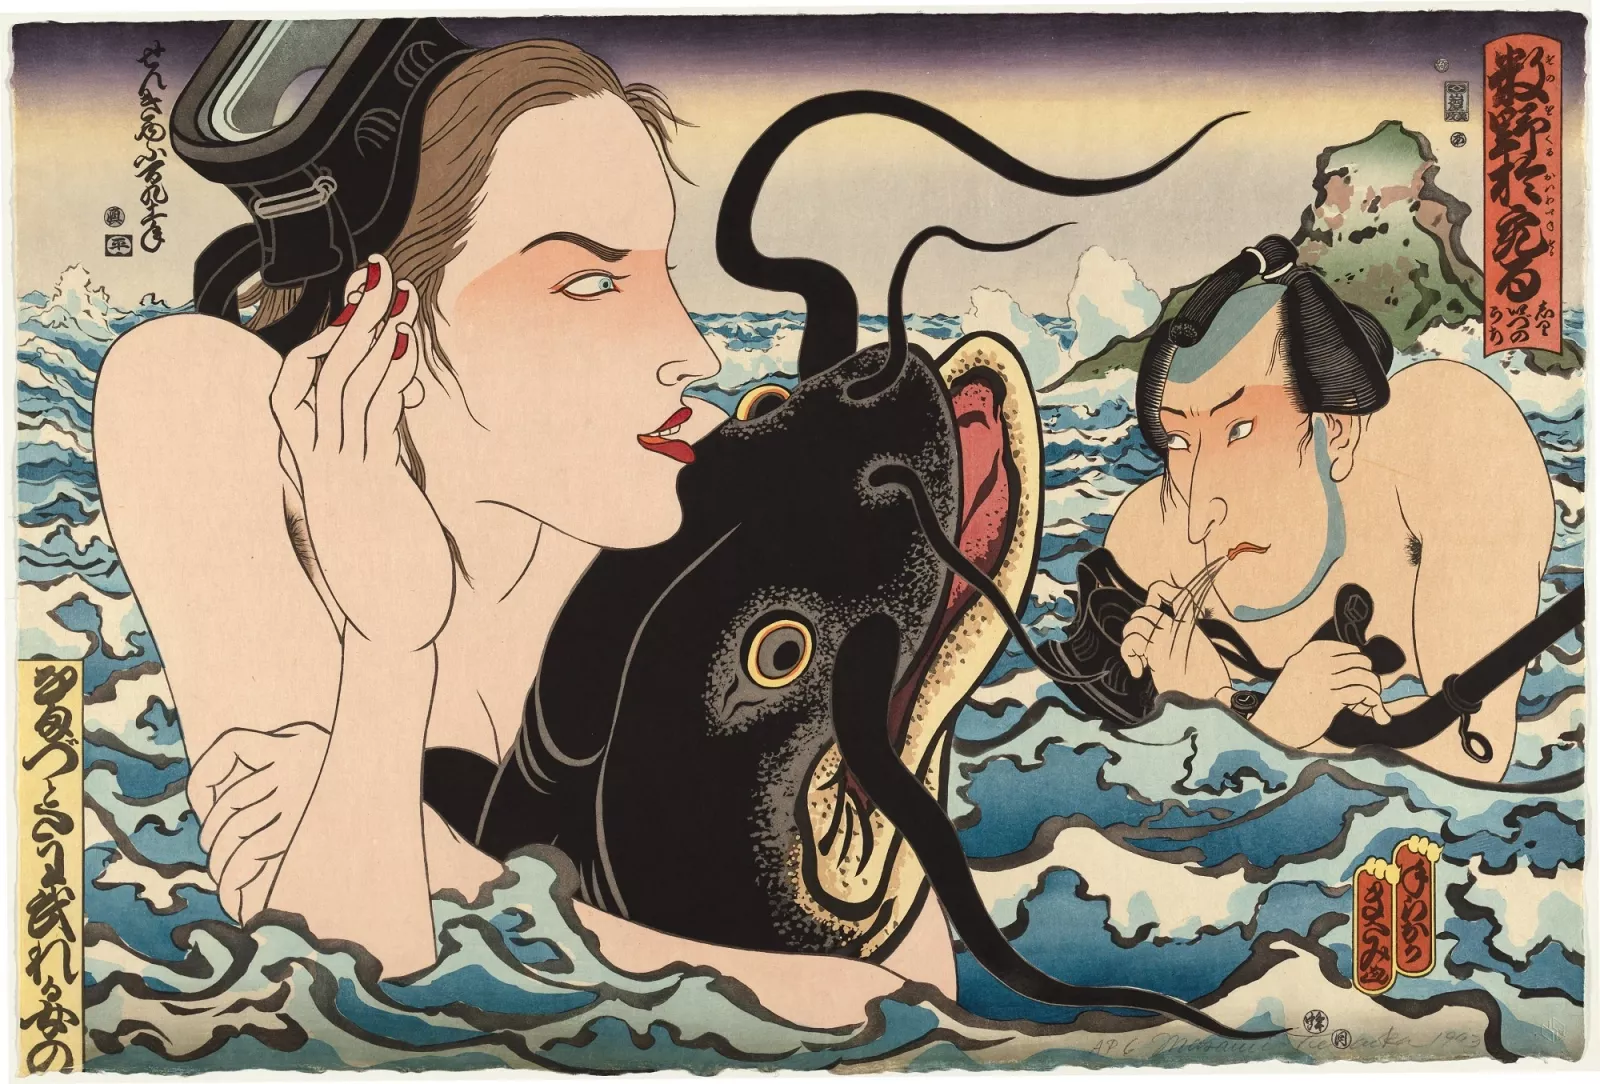 Colour print of man and woman staring at each other in the ocean. Print style reminiscent of traditional Japanese Ukiyo-e prints